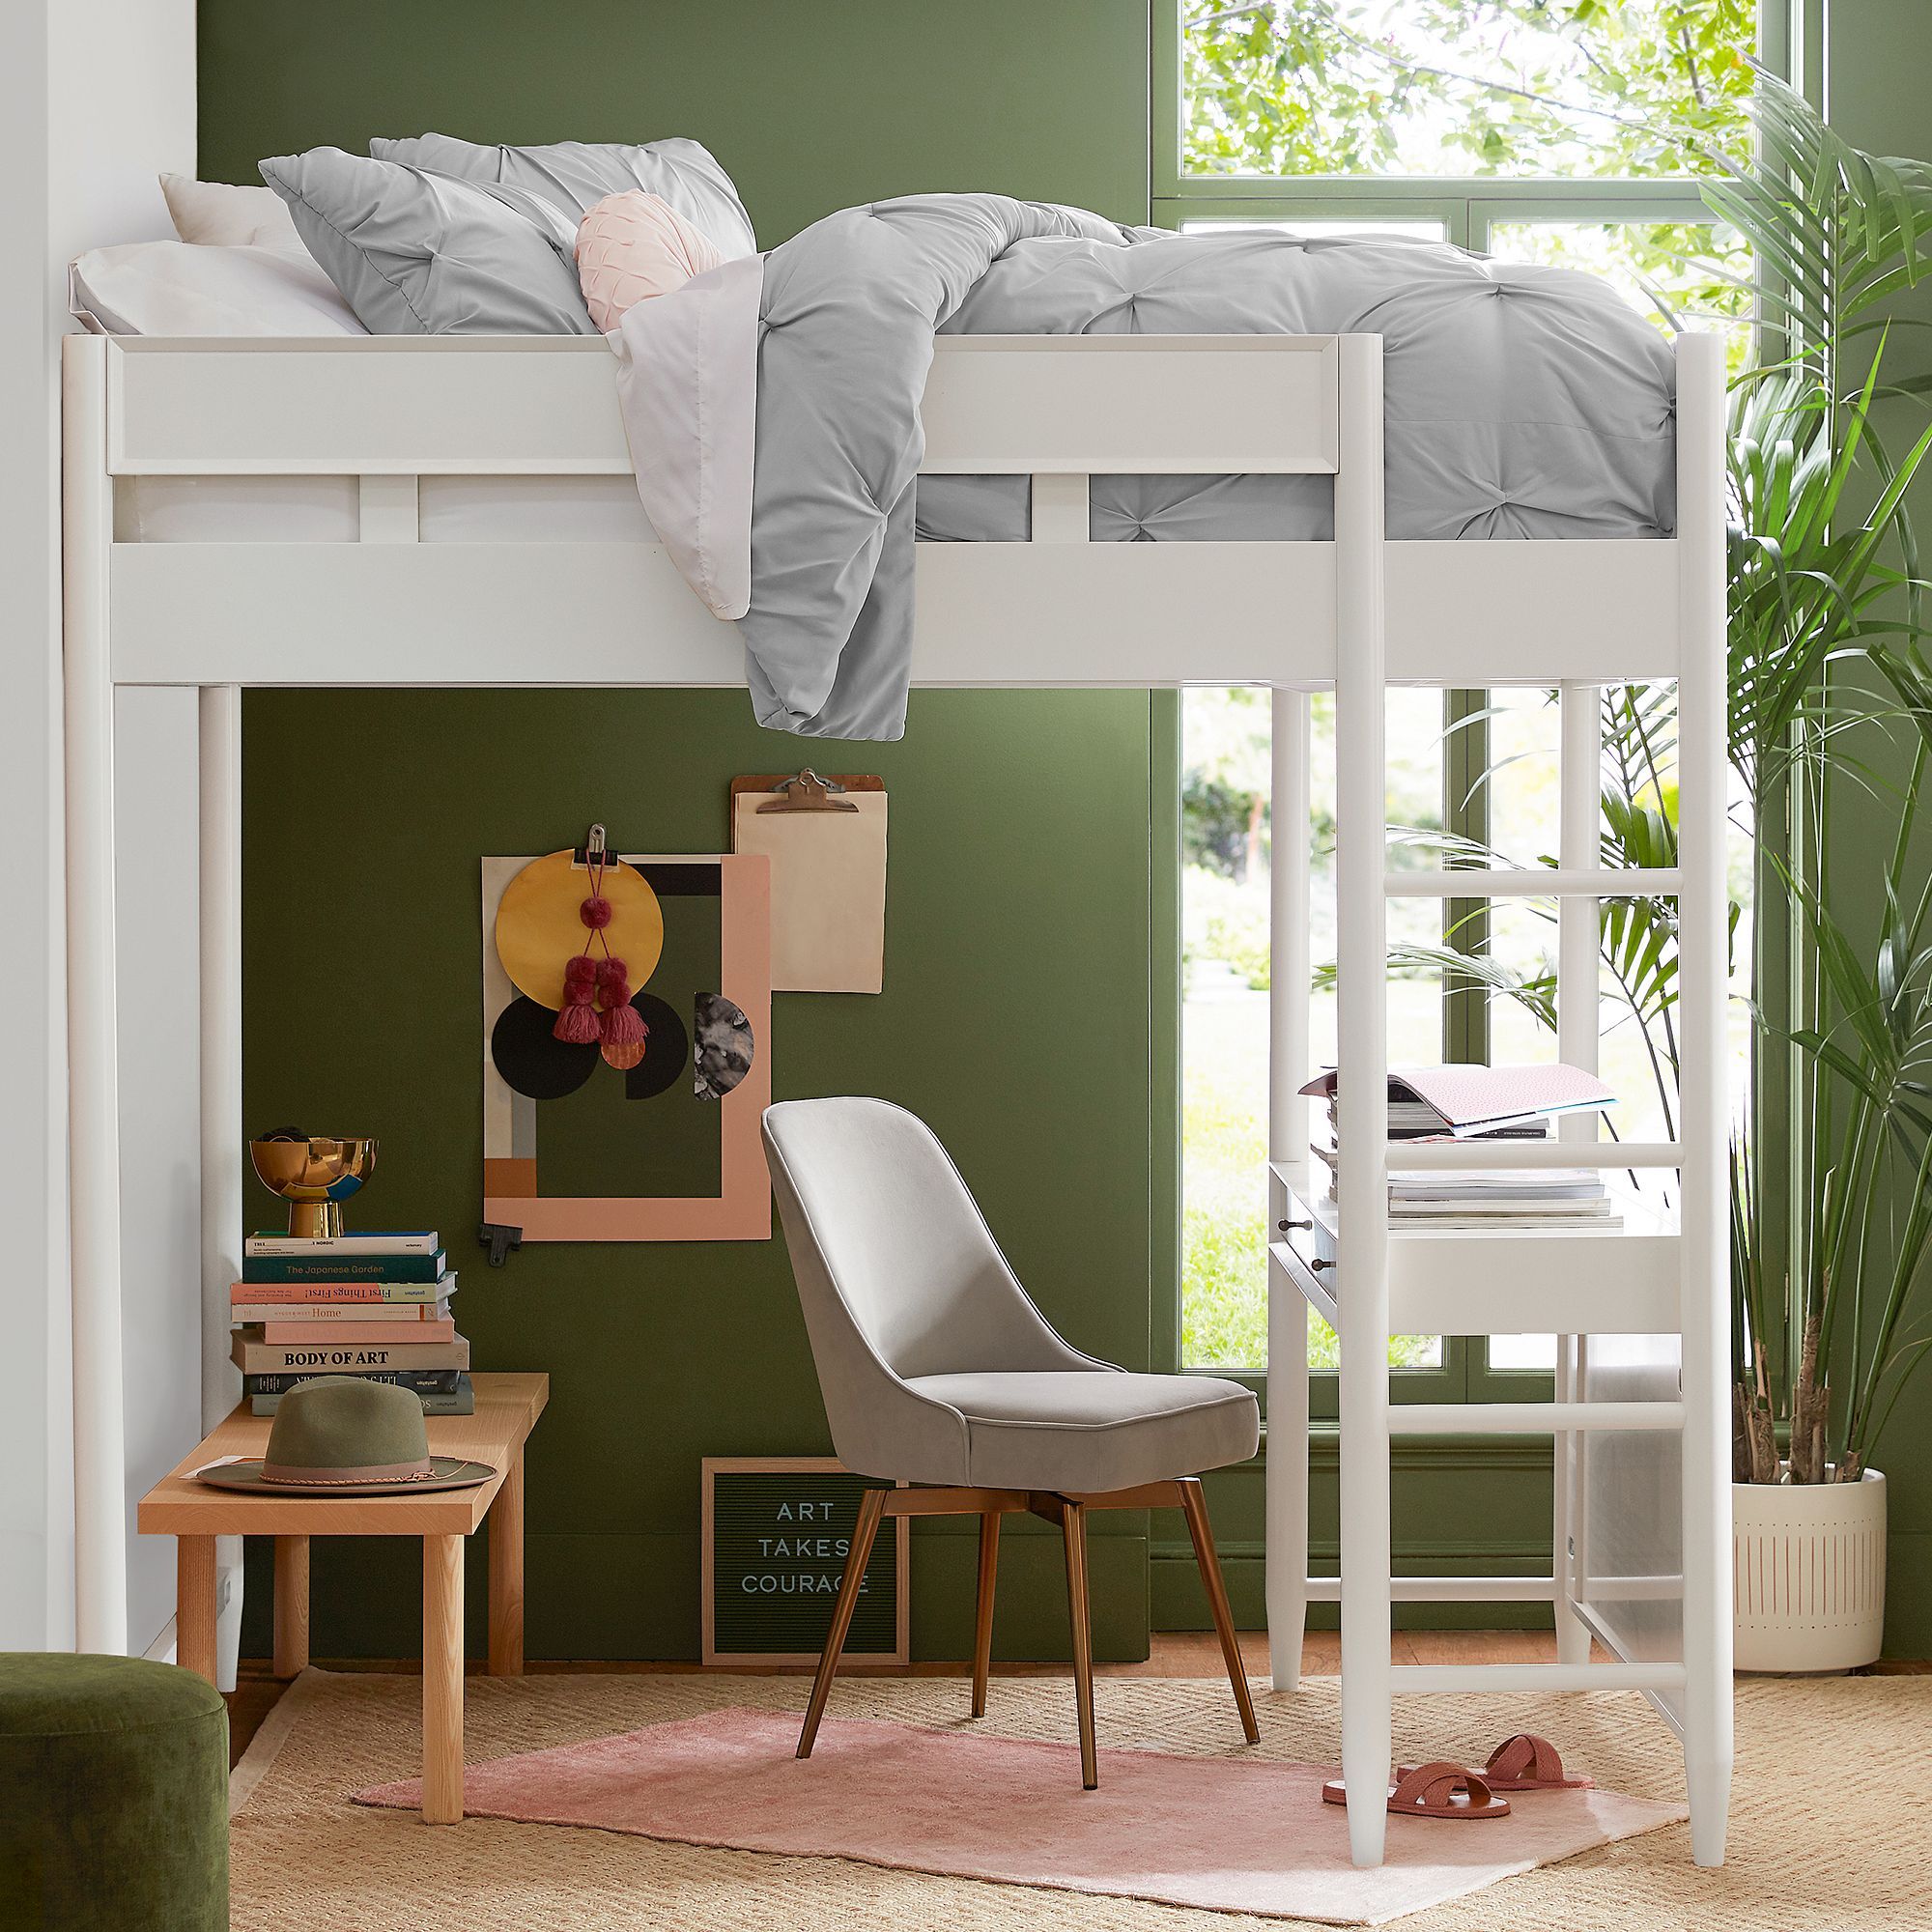 elevated loft bed